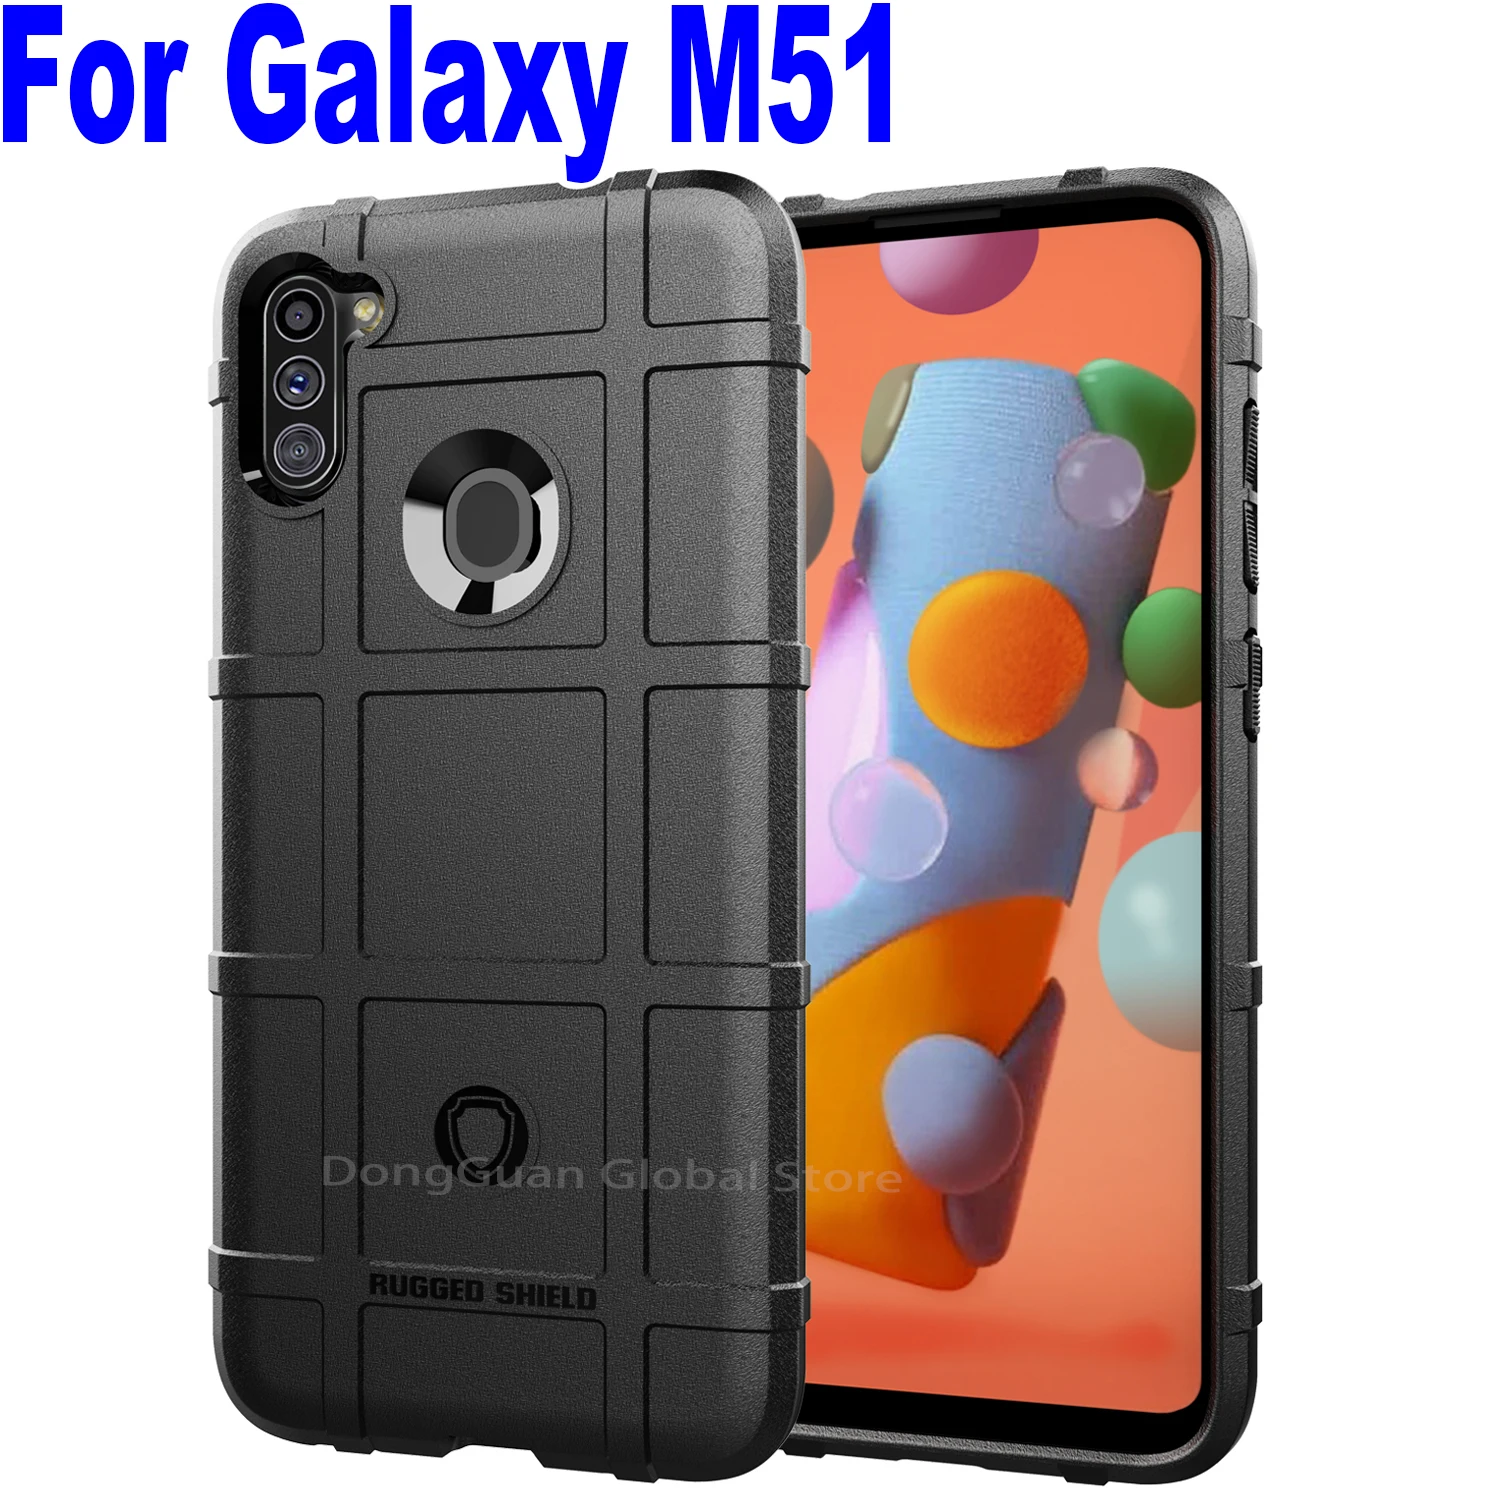 

Rugged Shield Shockproof Armor Case For Samsung Galaxy M51 SM-M515 Side-mounted Fingerprint Cover Shell Case